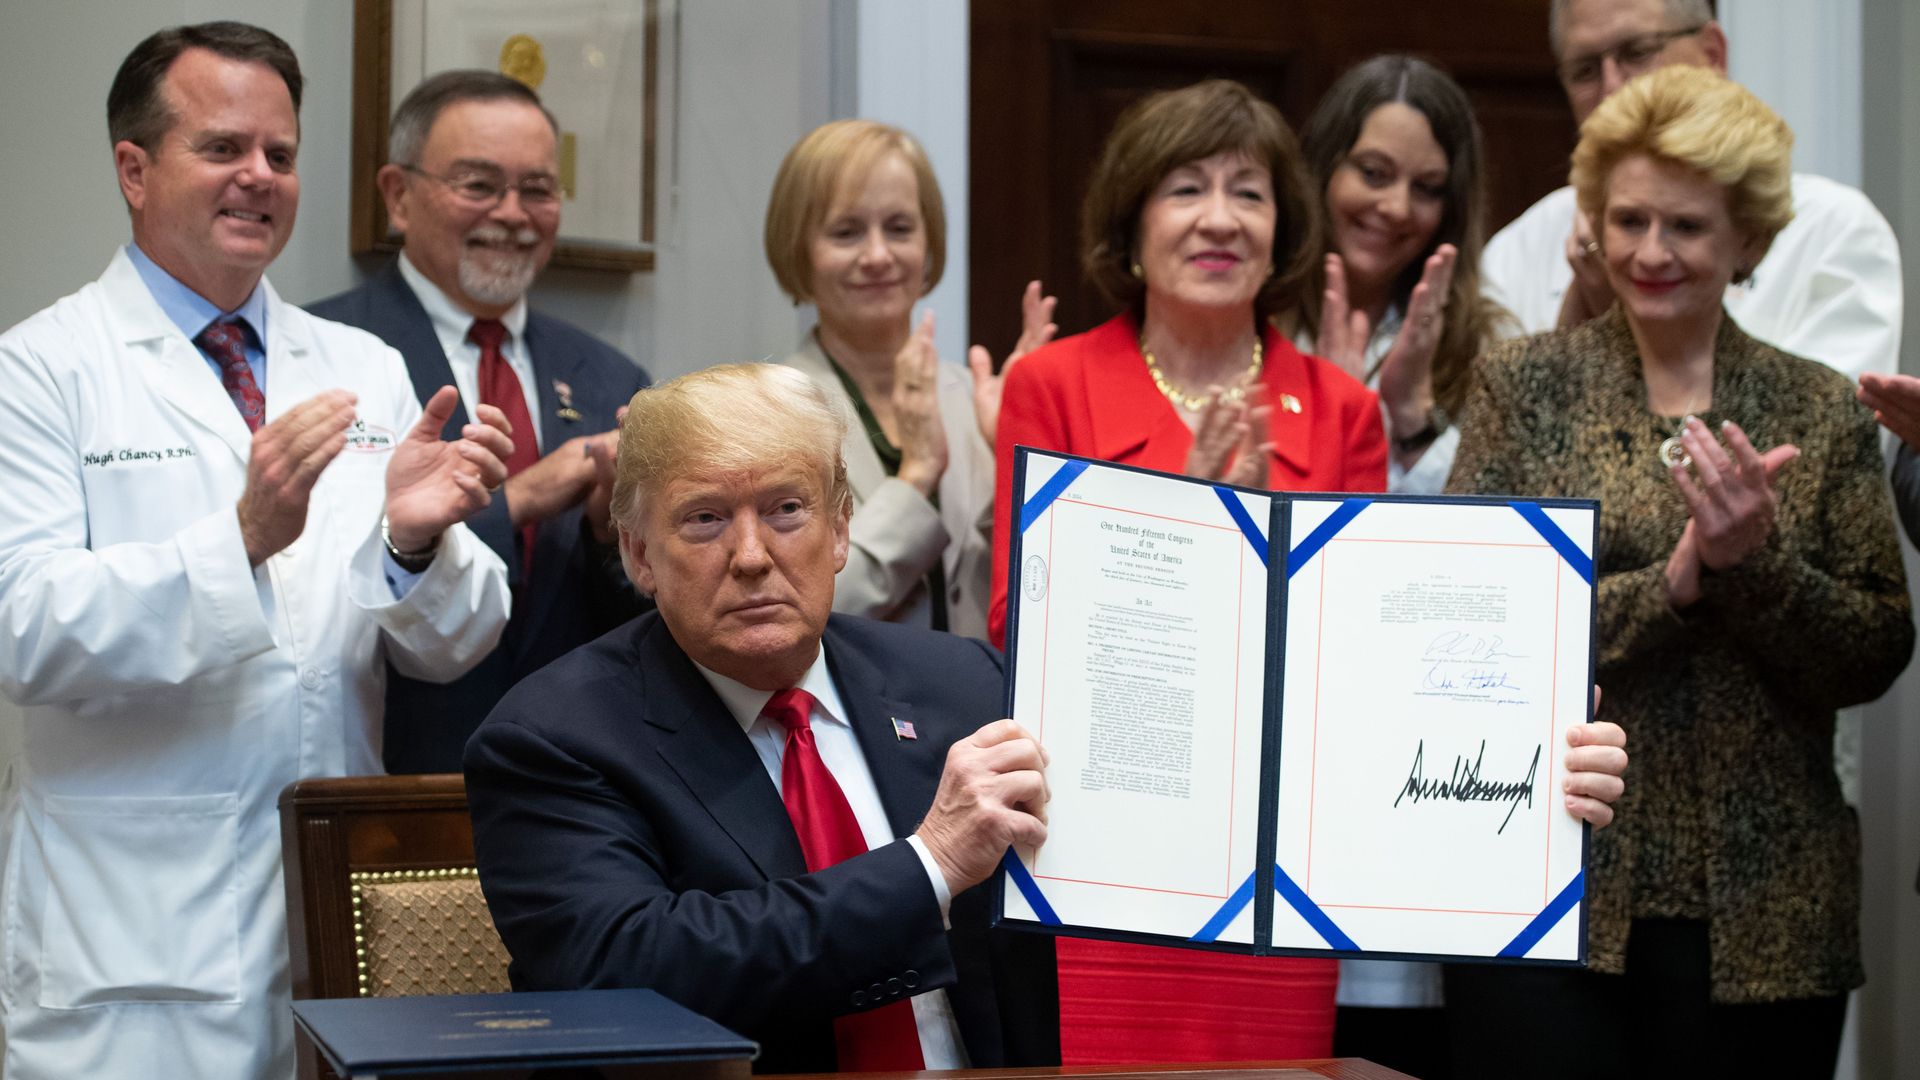 President Trump signing an executive order on drug prices